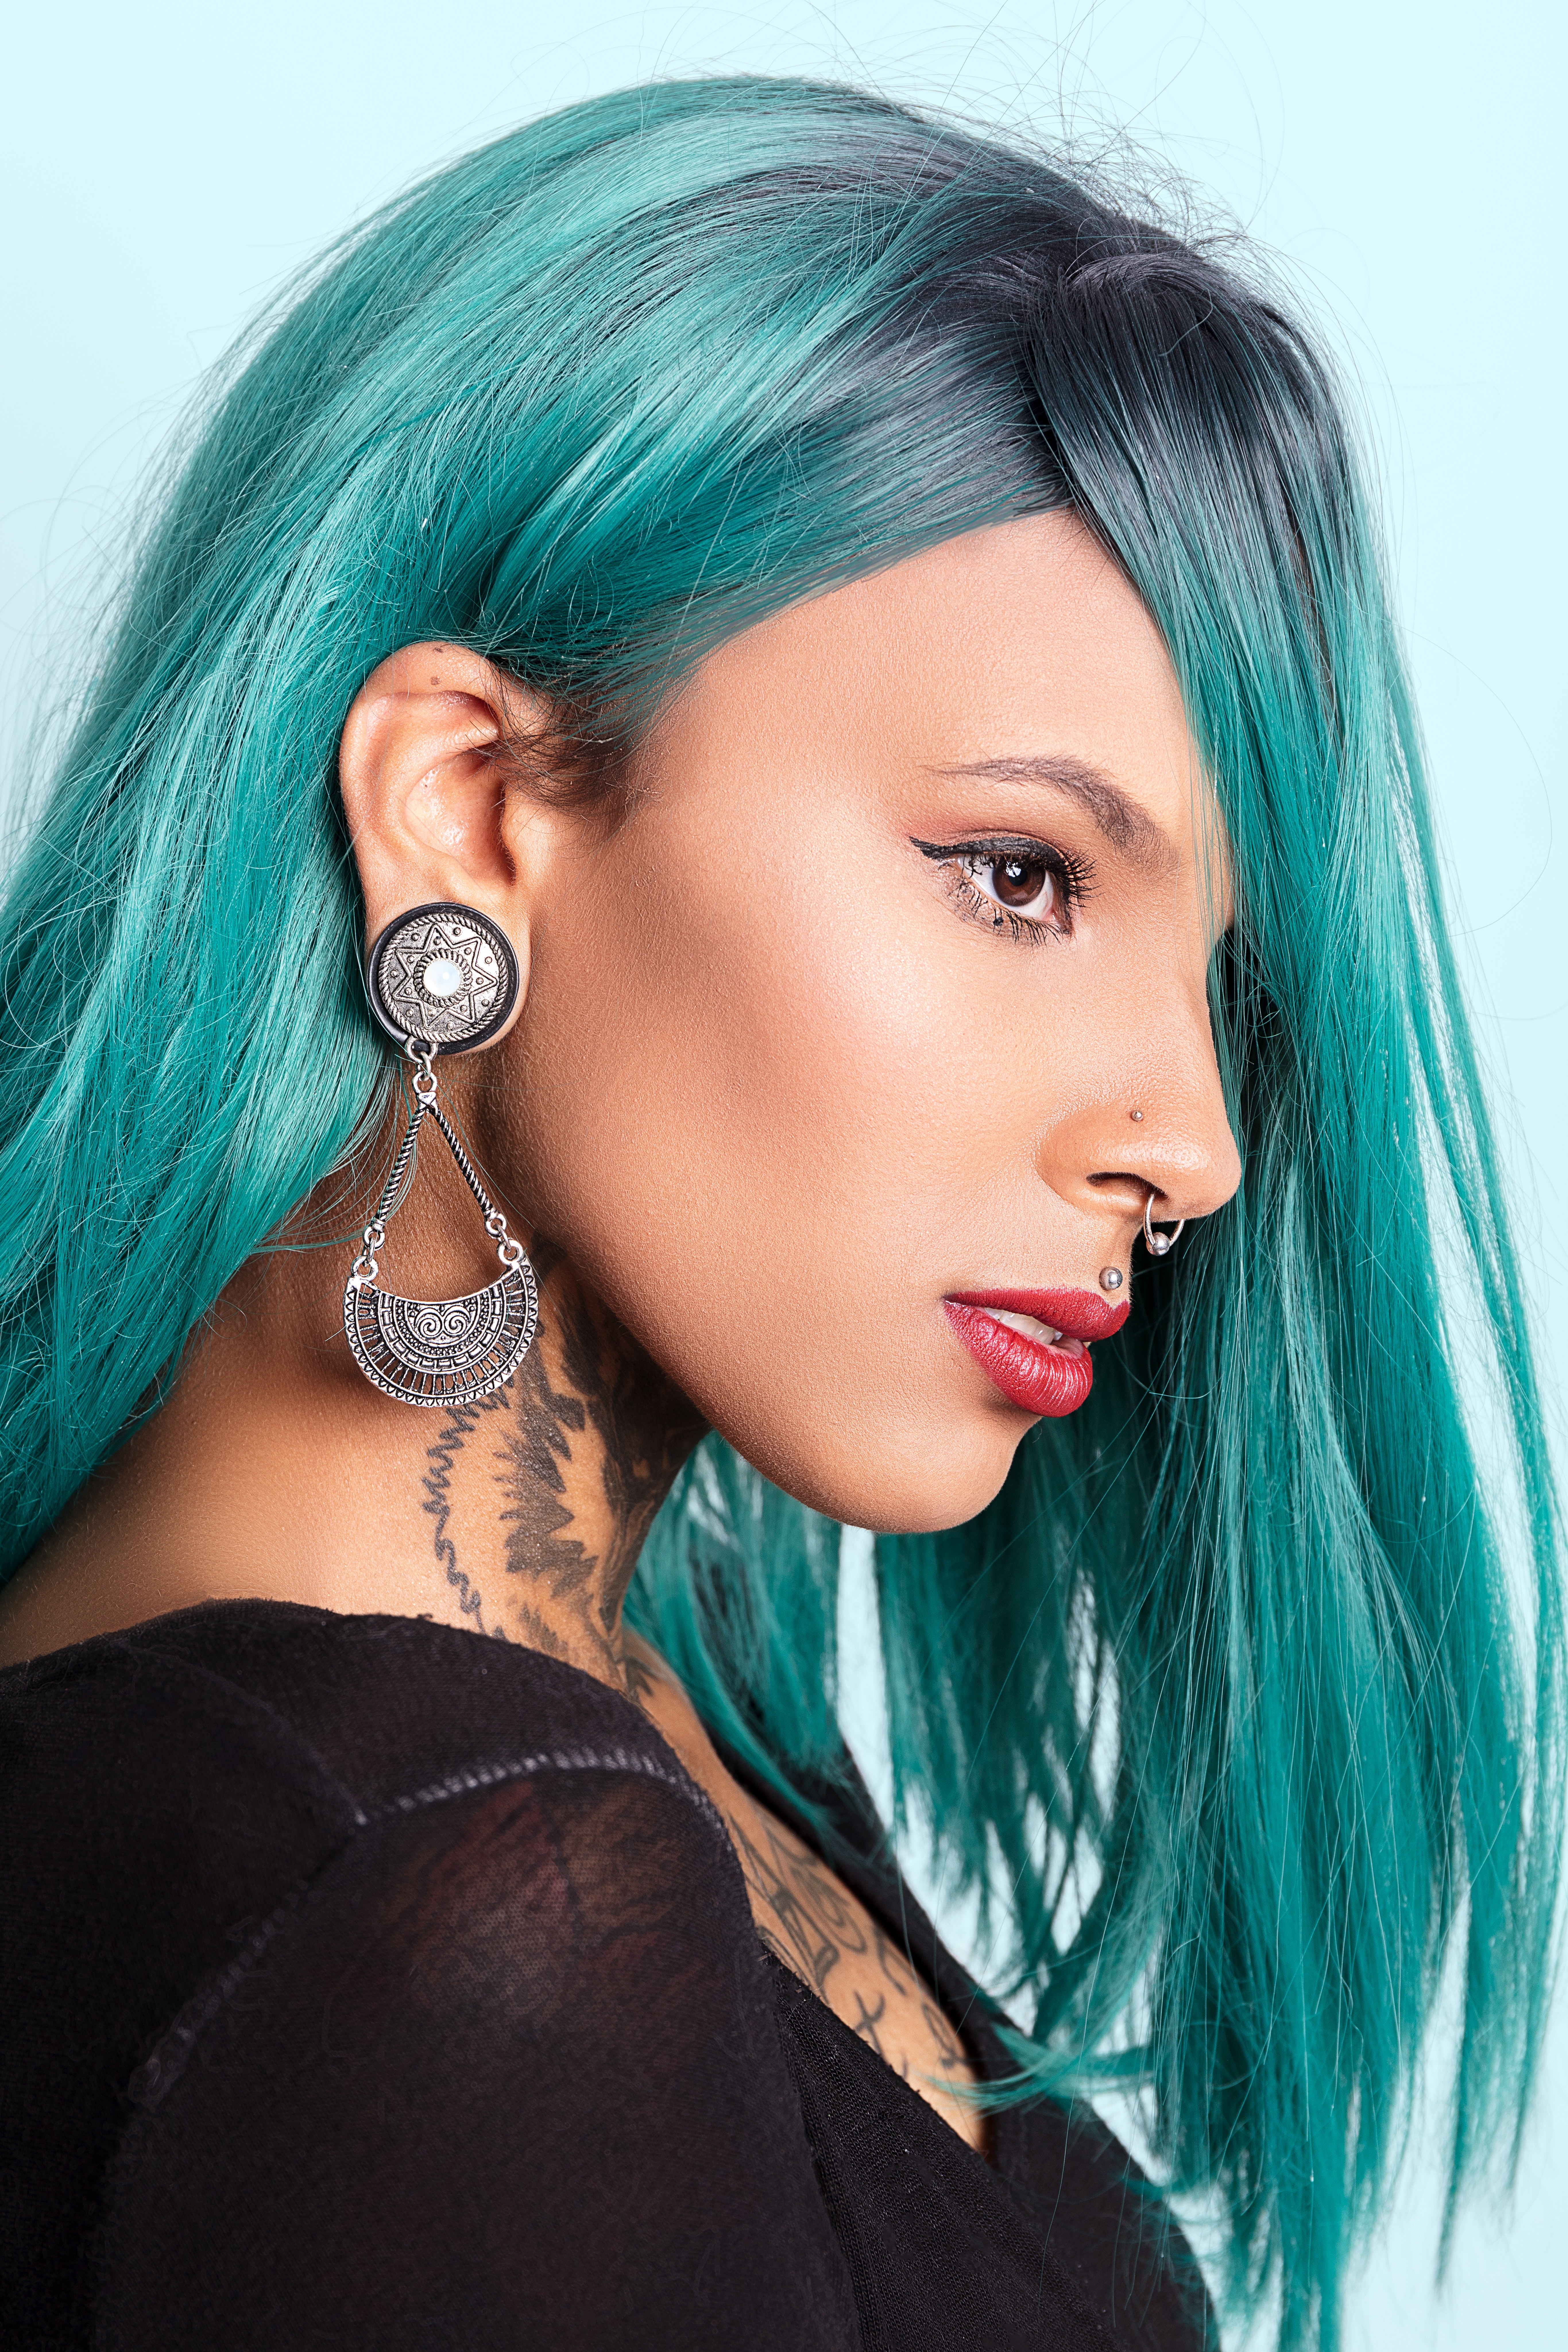 a-tattooed-woman-with-dyed-hair-and-piercings